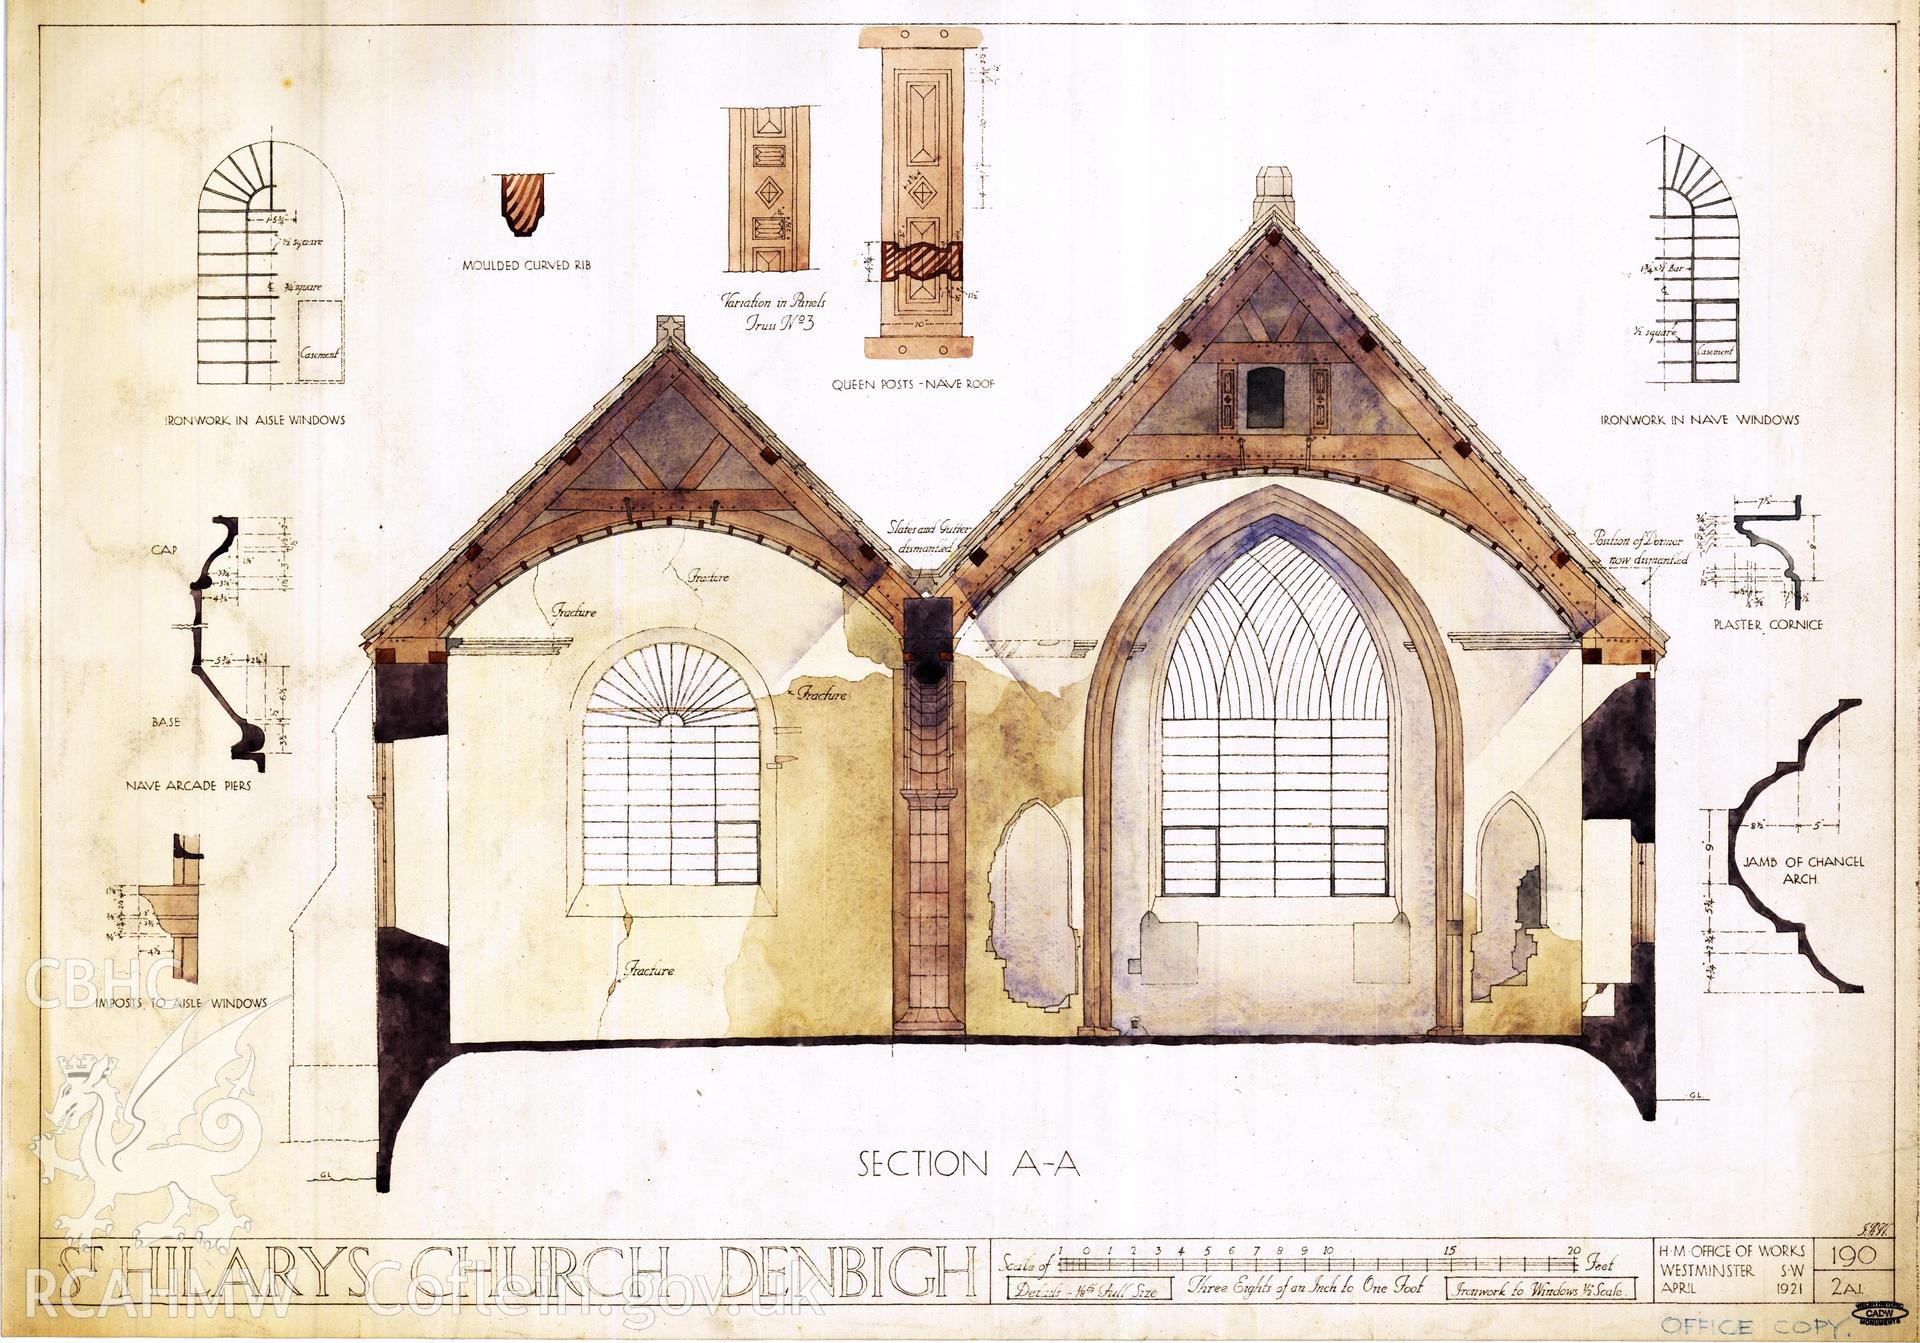 Cadw guardianship monument drawing of Denbigh St Hillary's Church. Section (tinted). Cadw Ref. No:190/2A1. Scale 1:32.8.